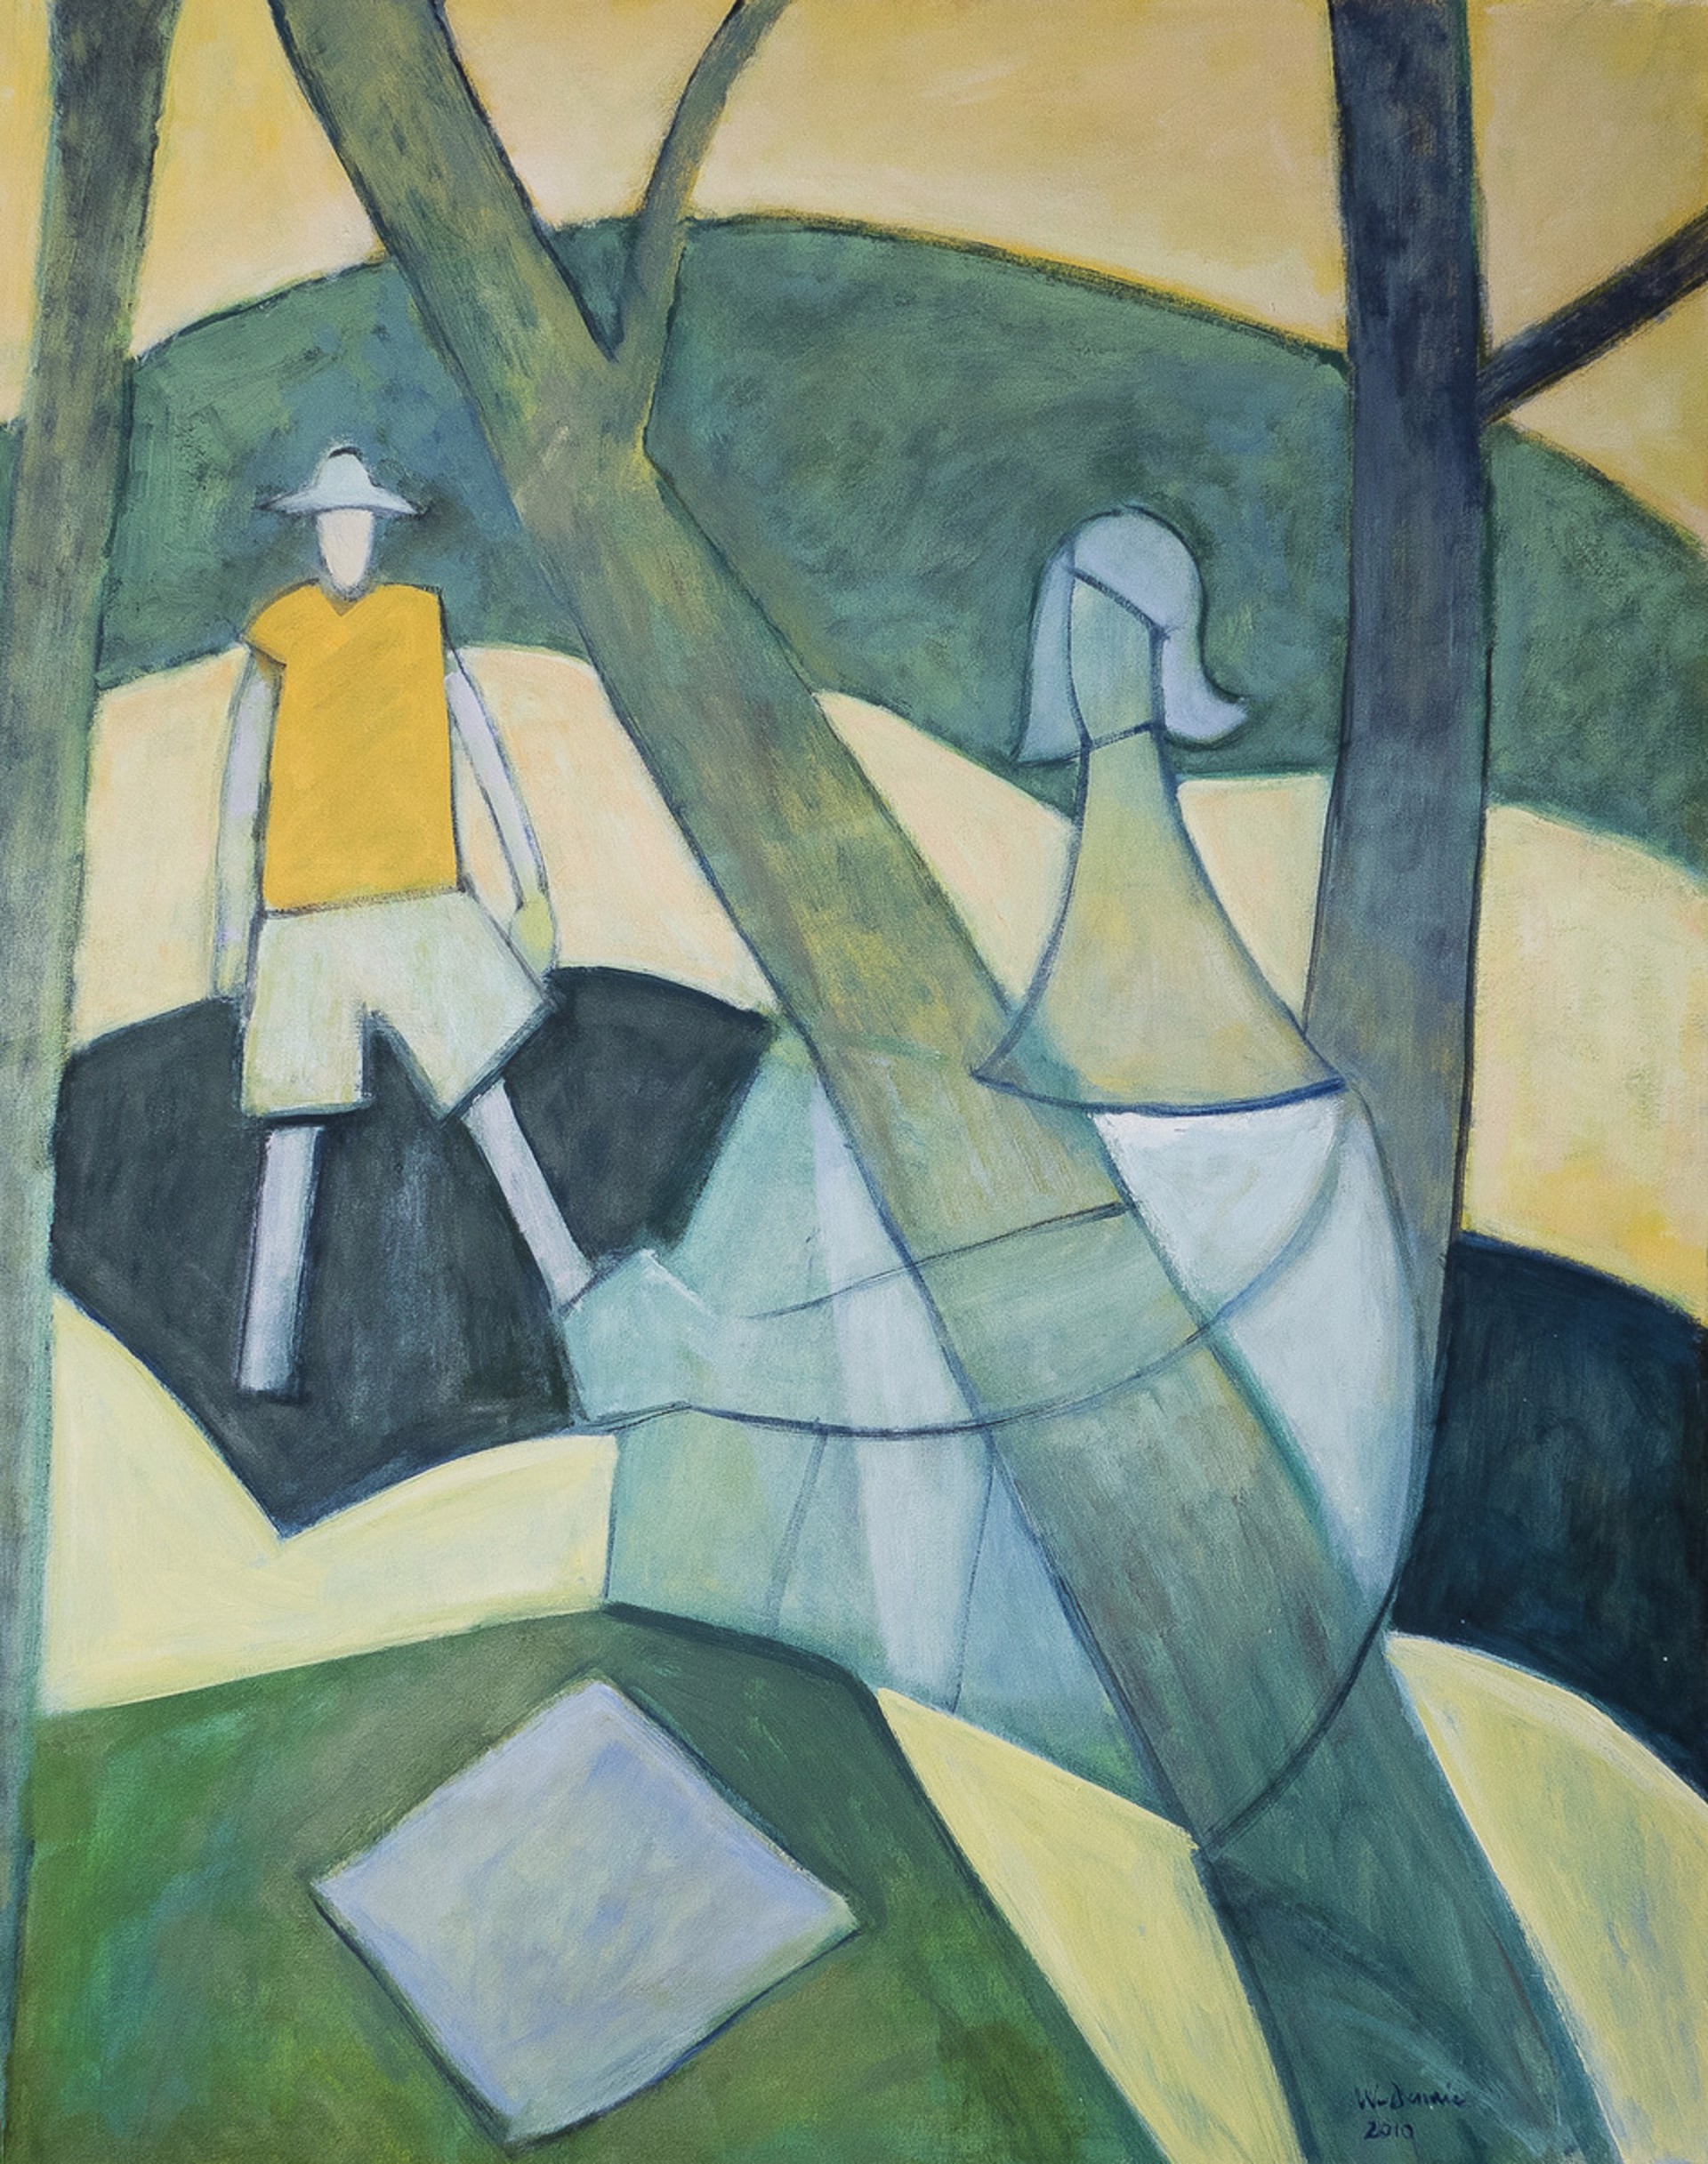 man and woman cubist painting with green yellow and blue forest and hill scene